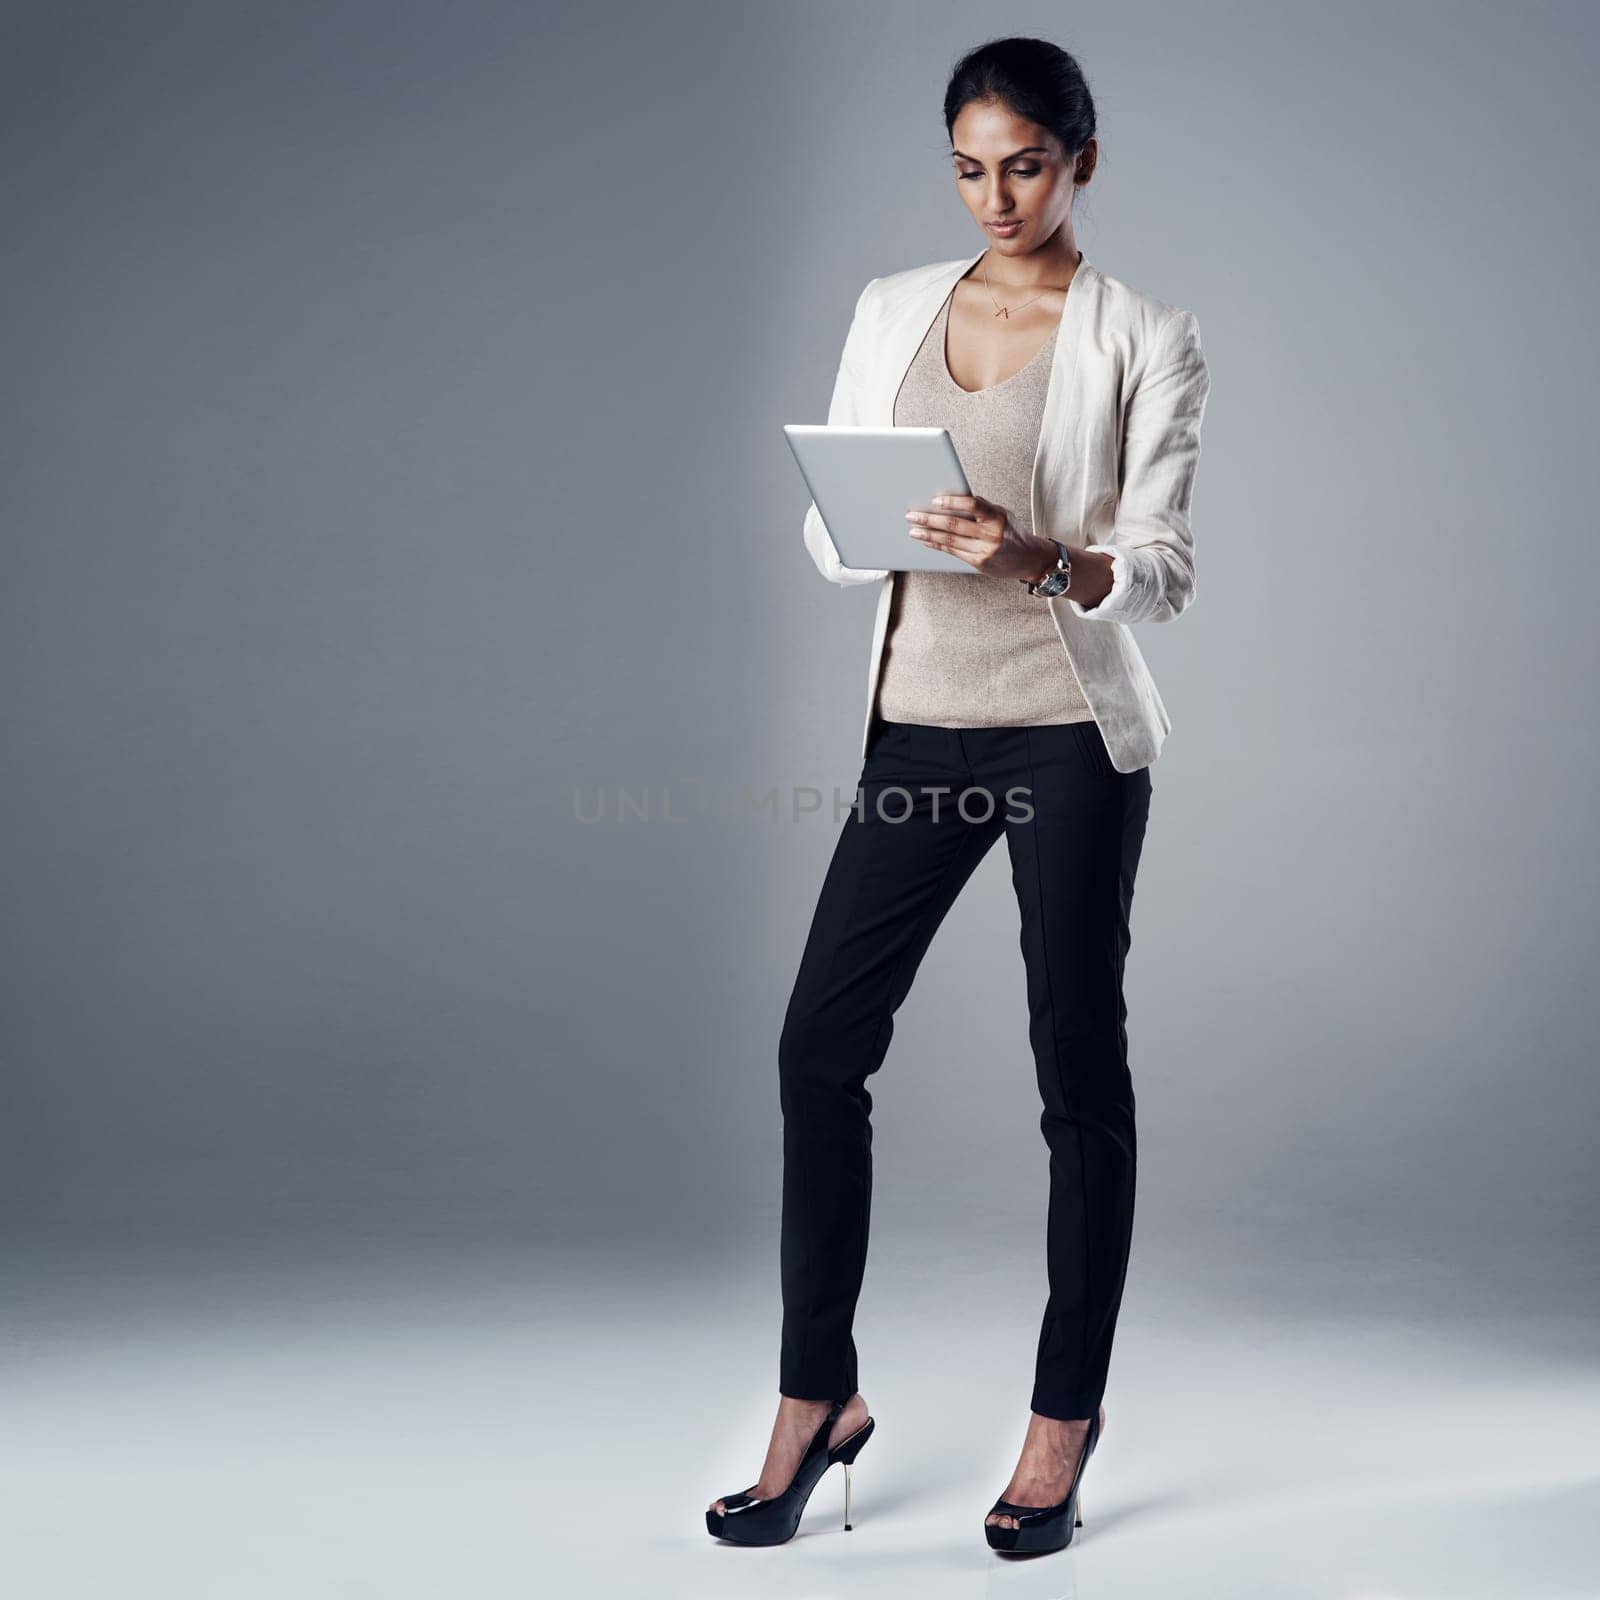 Tracking business trends online. Studio shot of a young businesswoman using a digital tablet against a gray background